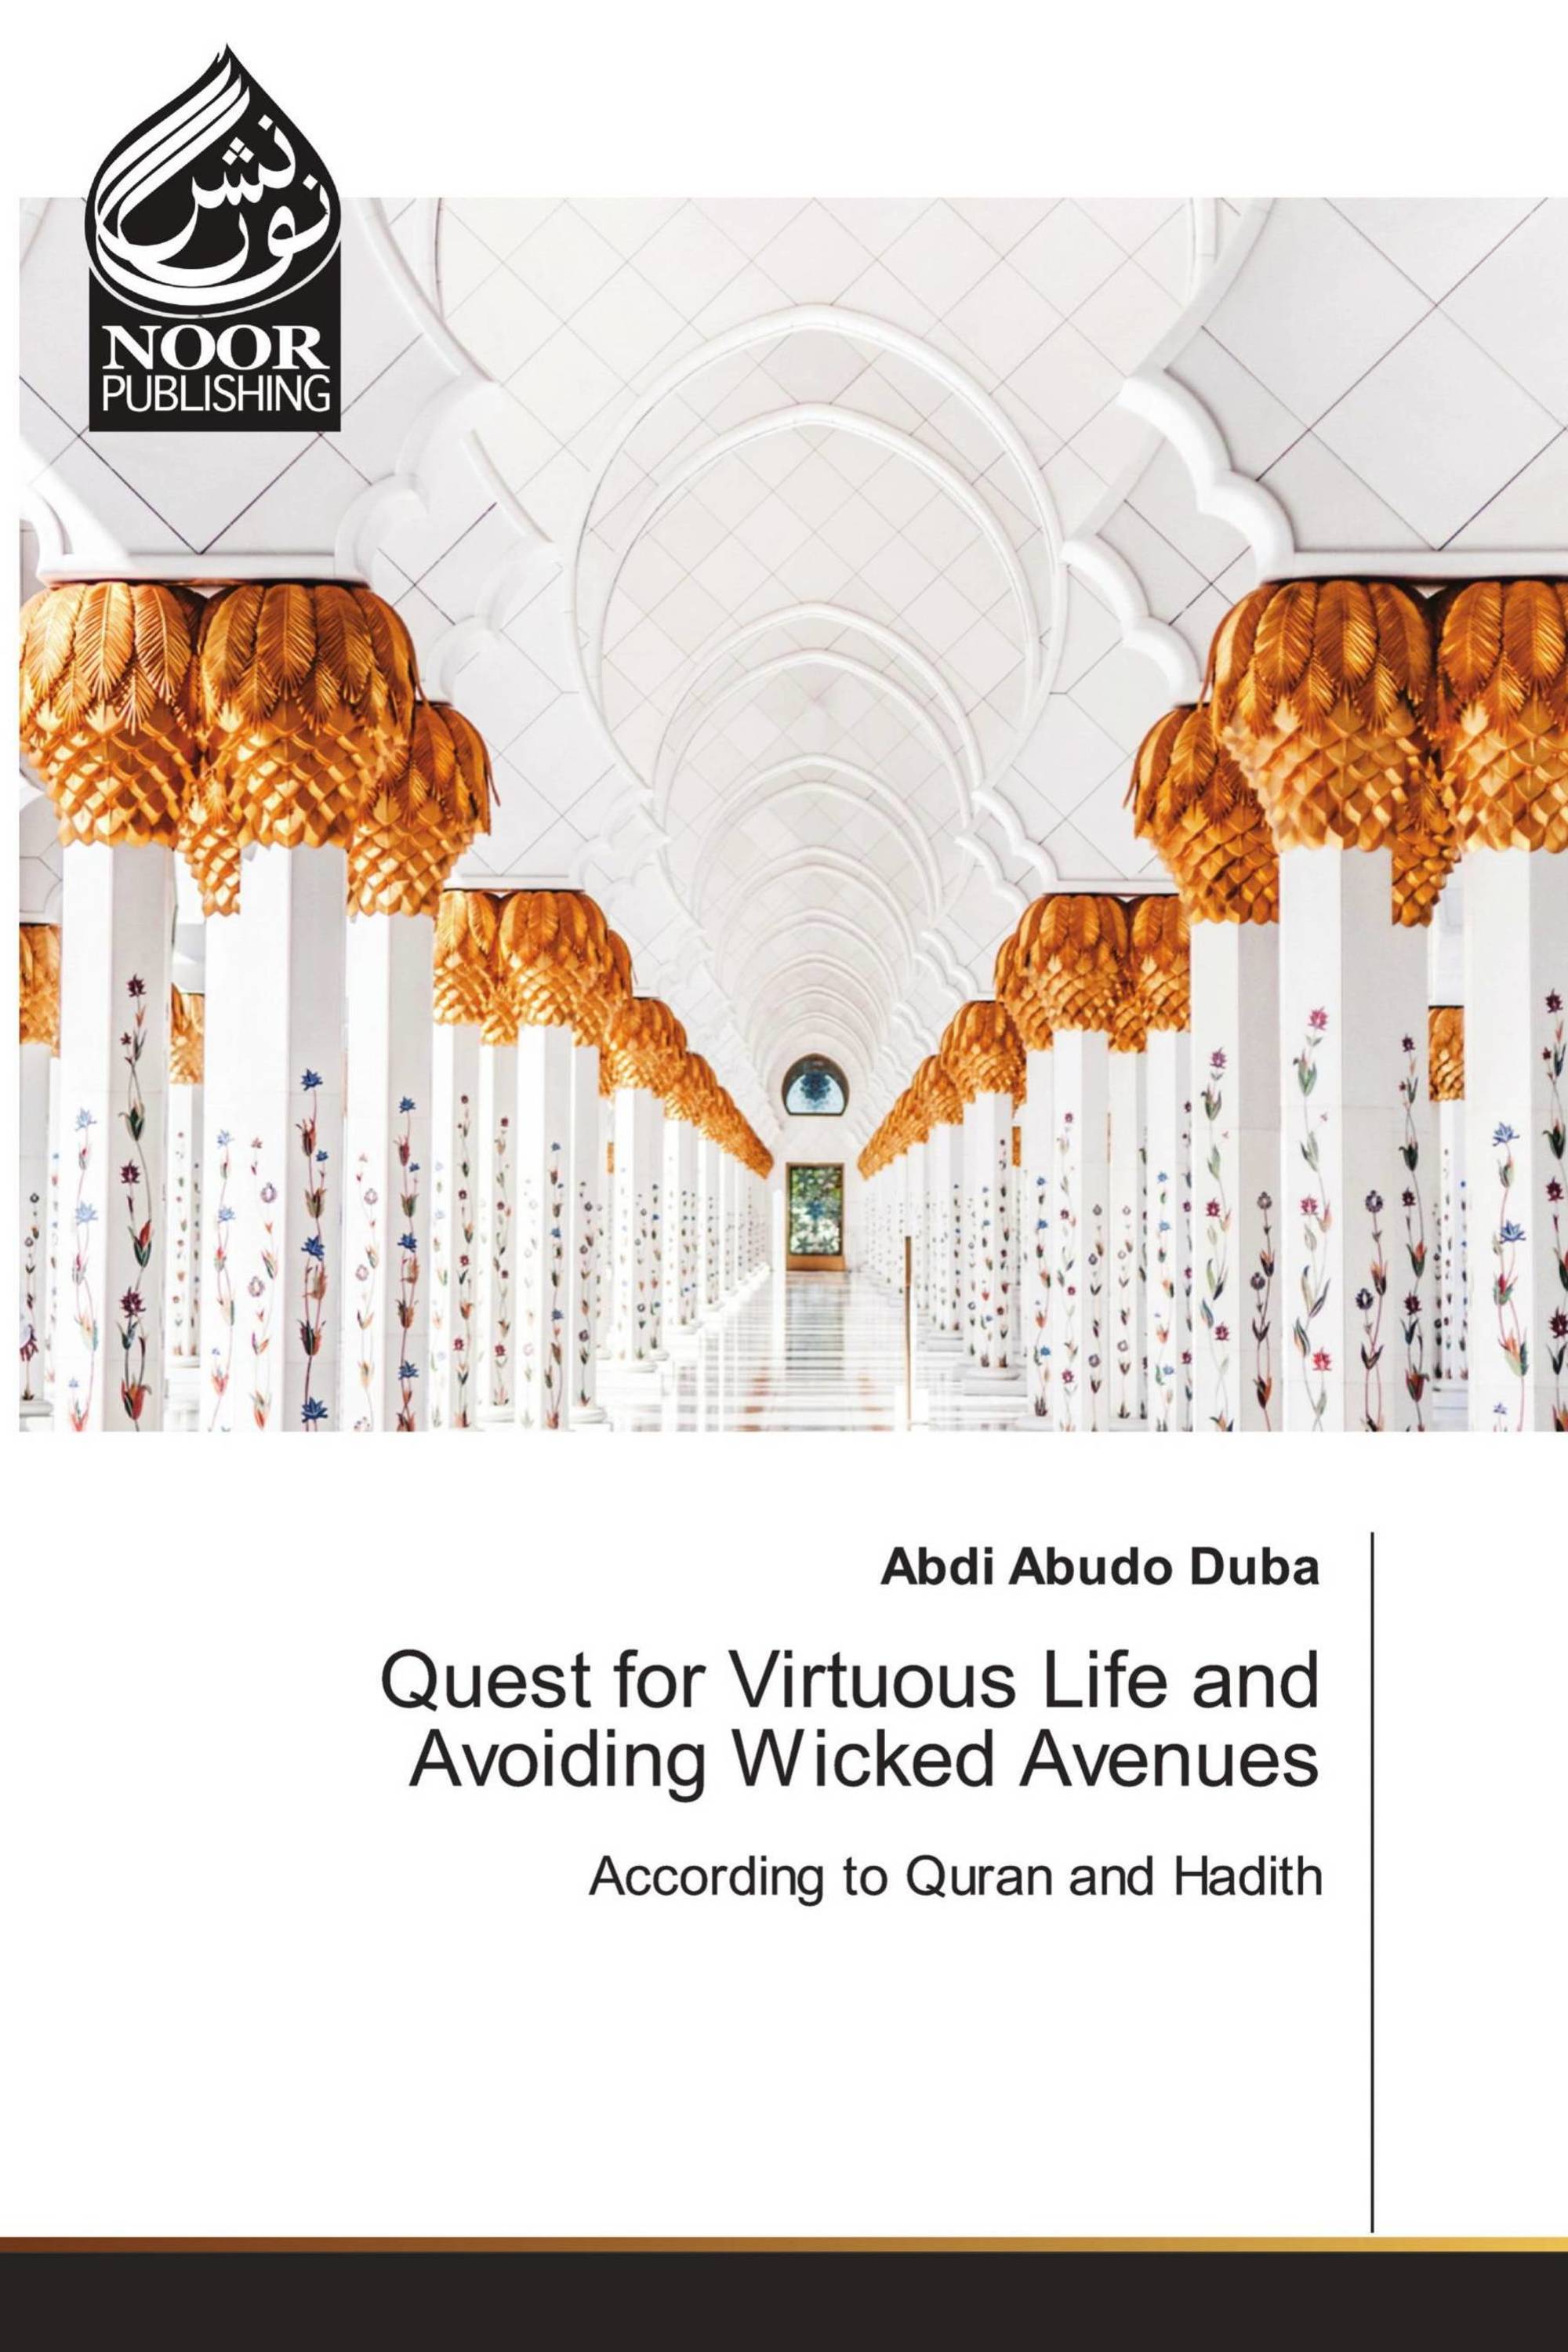 Quest for Virtuous Life and Avoiding Wicked Avenues